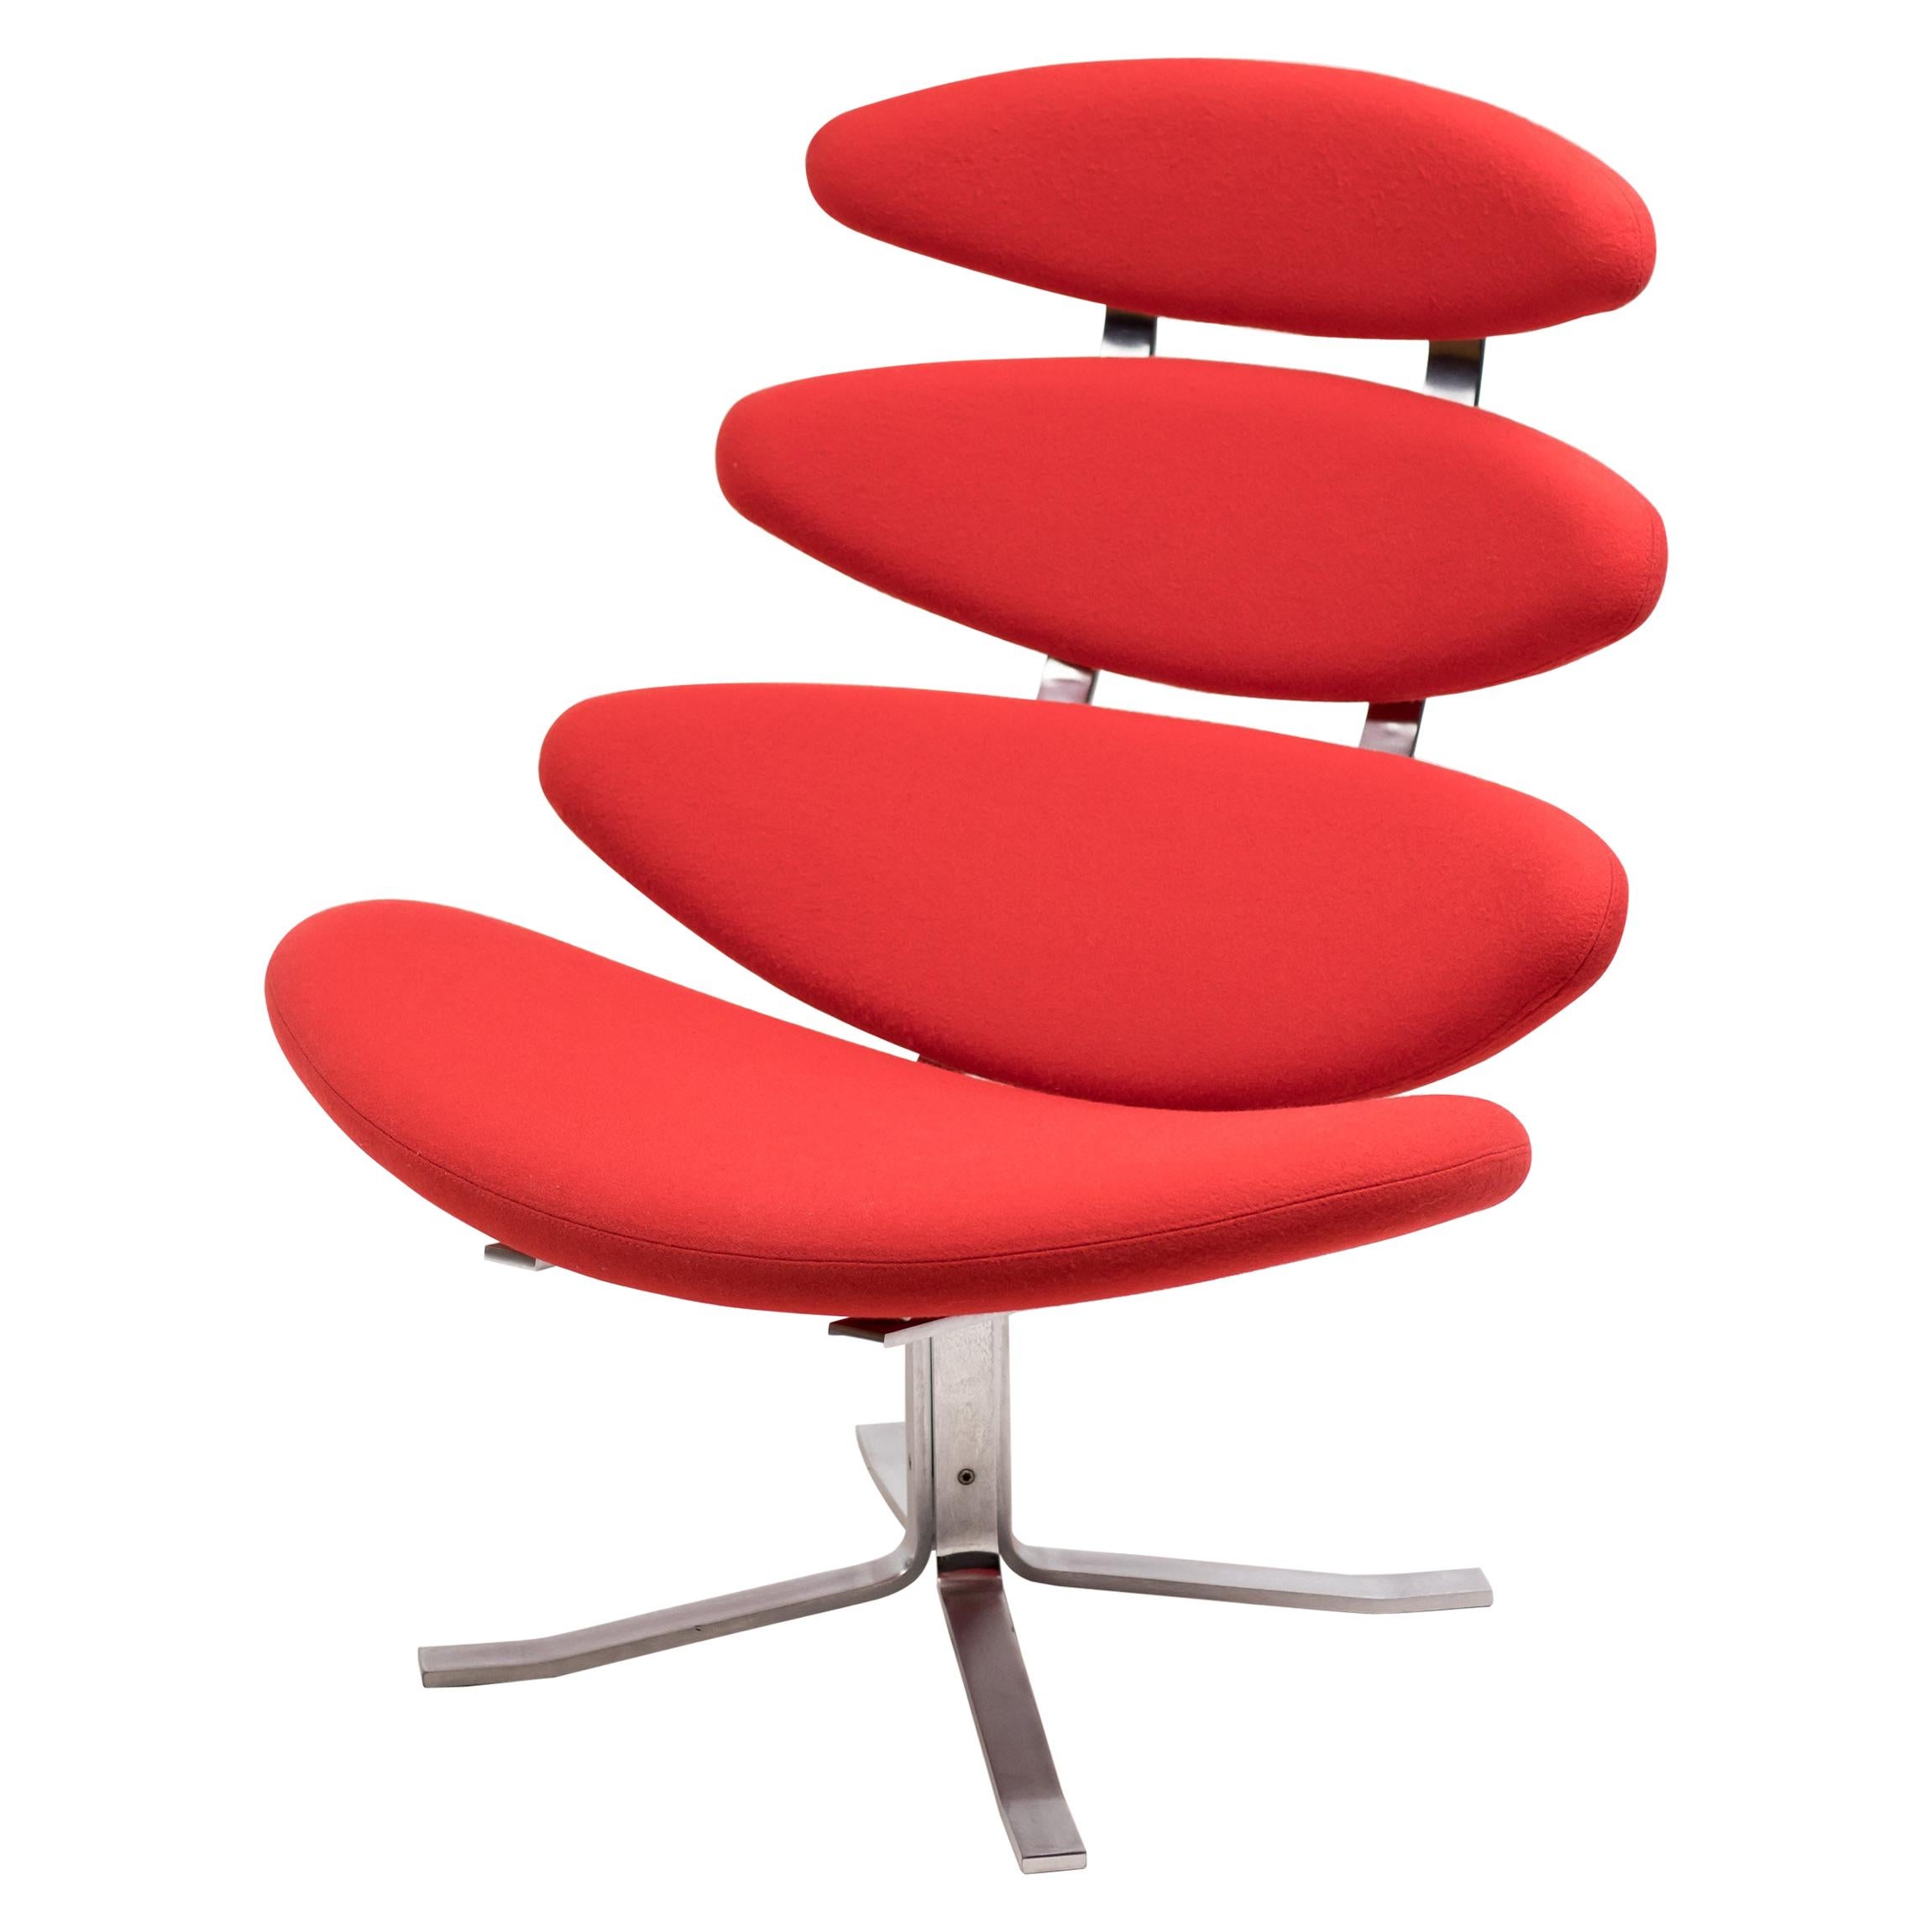 Bright Red EJ5 Corona Chair by Poul Volther